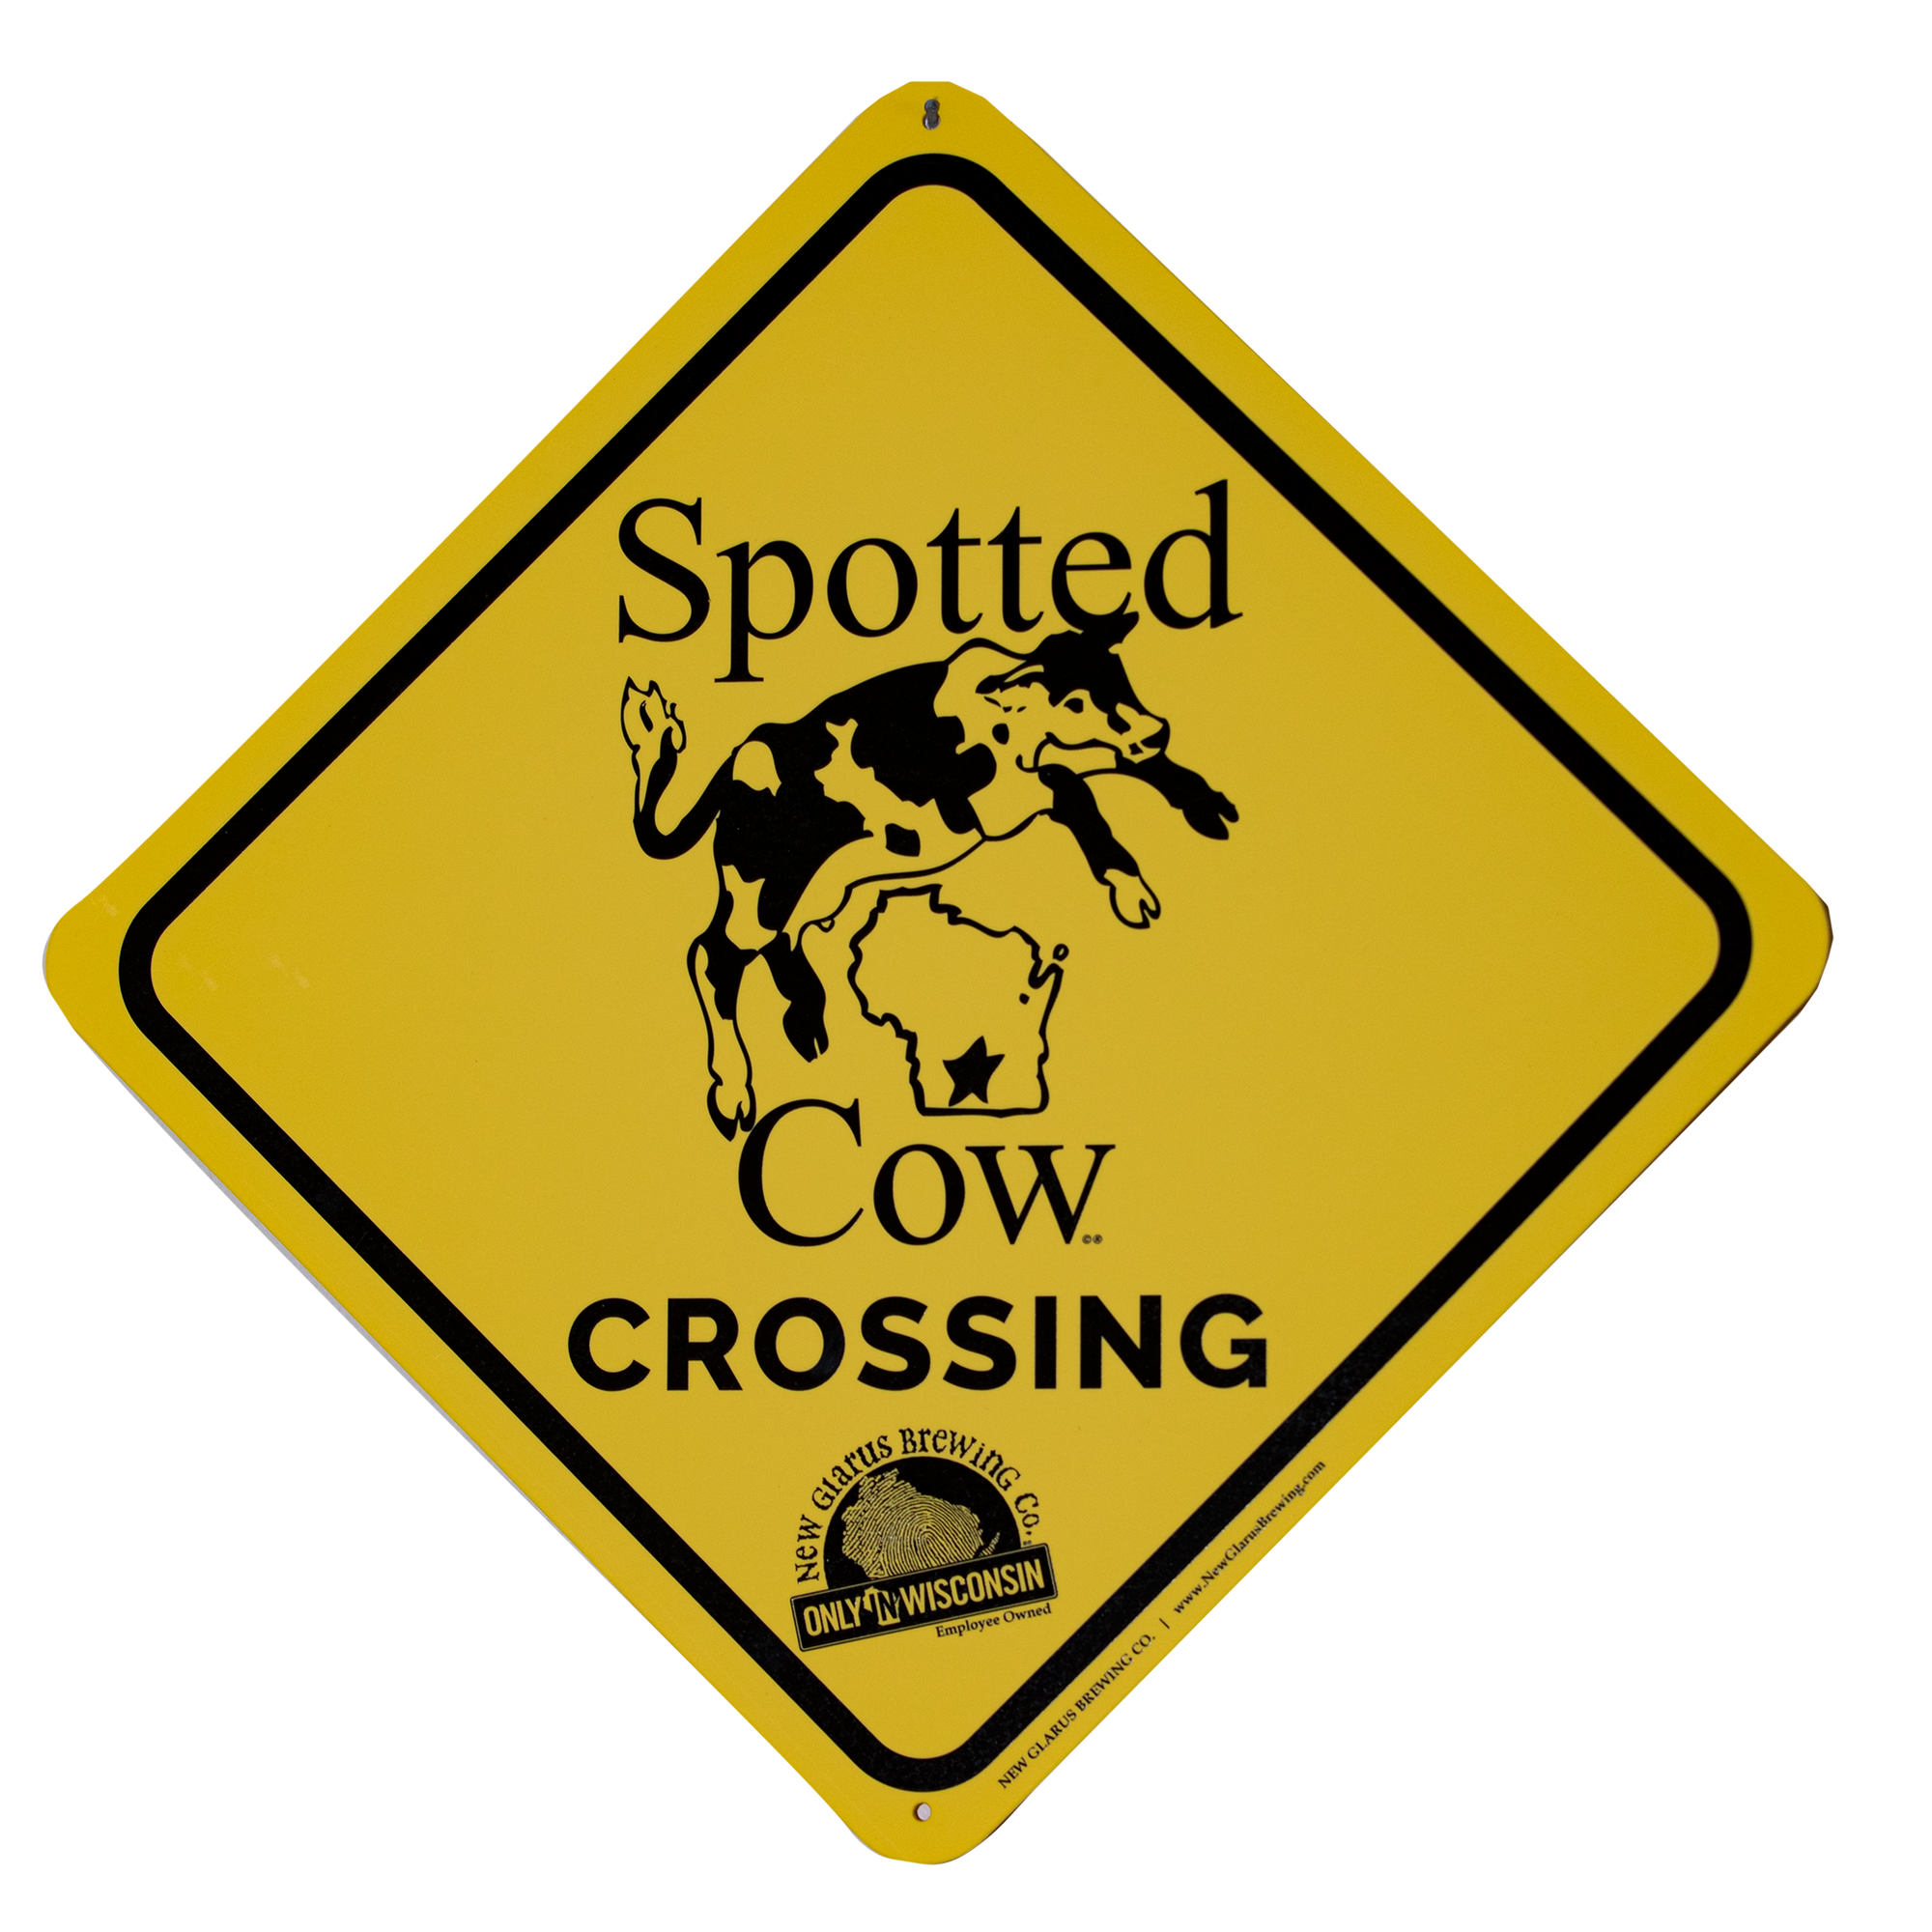 Bright yellow crossing sign with Spotted Cow logo in black ink.